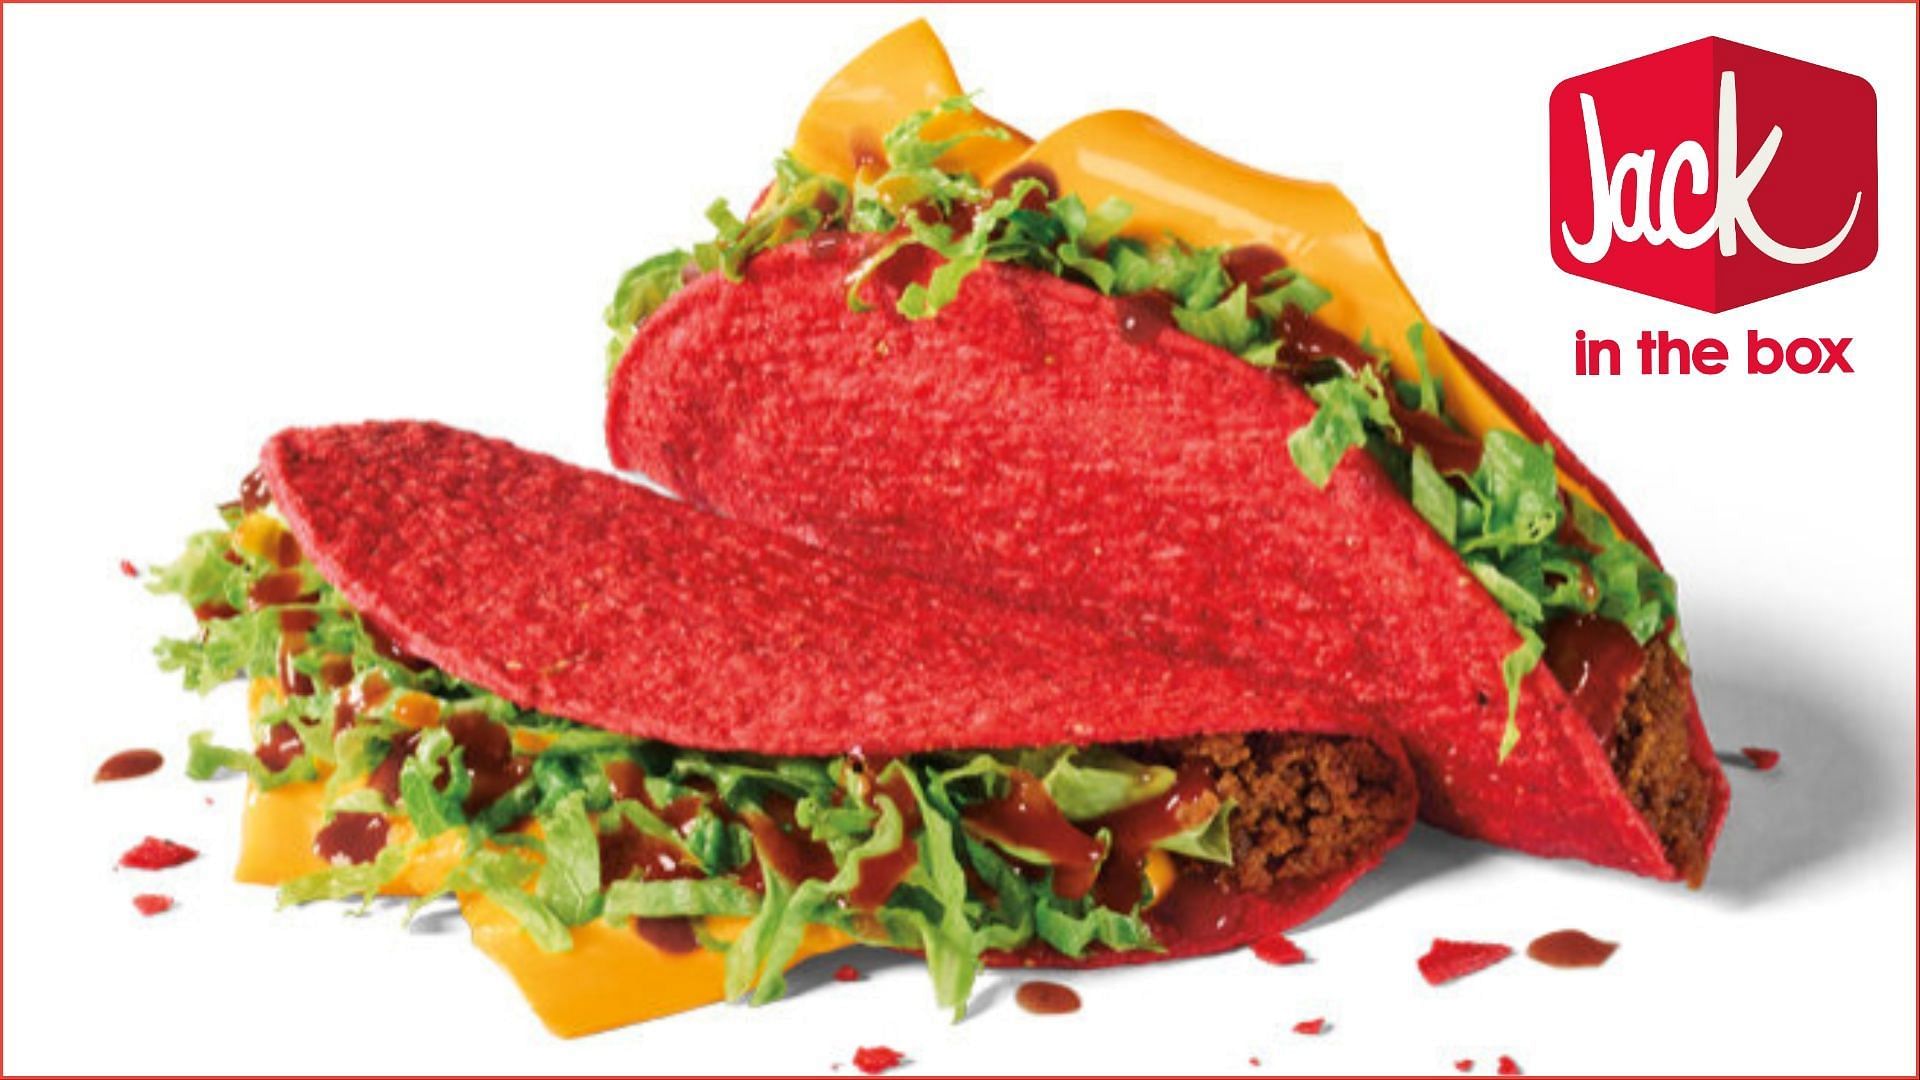 Jack in the Box introduces Angry Monster Tacos with other Halloween-themed offerings (Image via Jack in the Box)